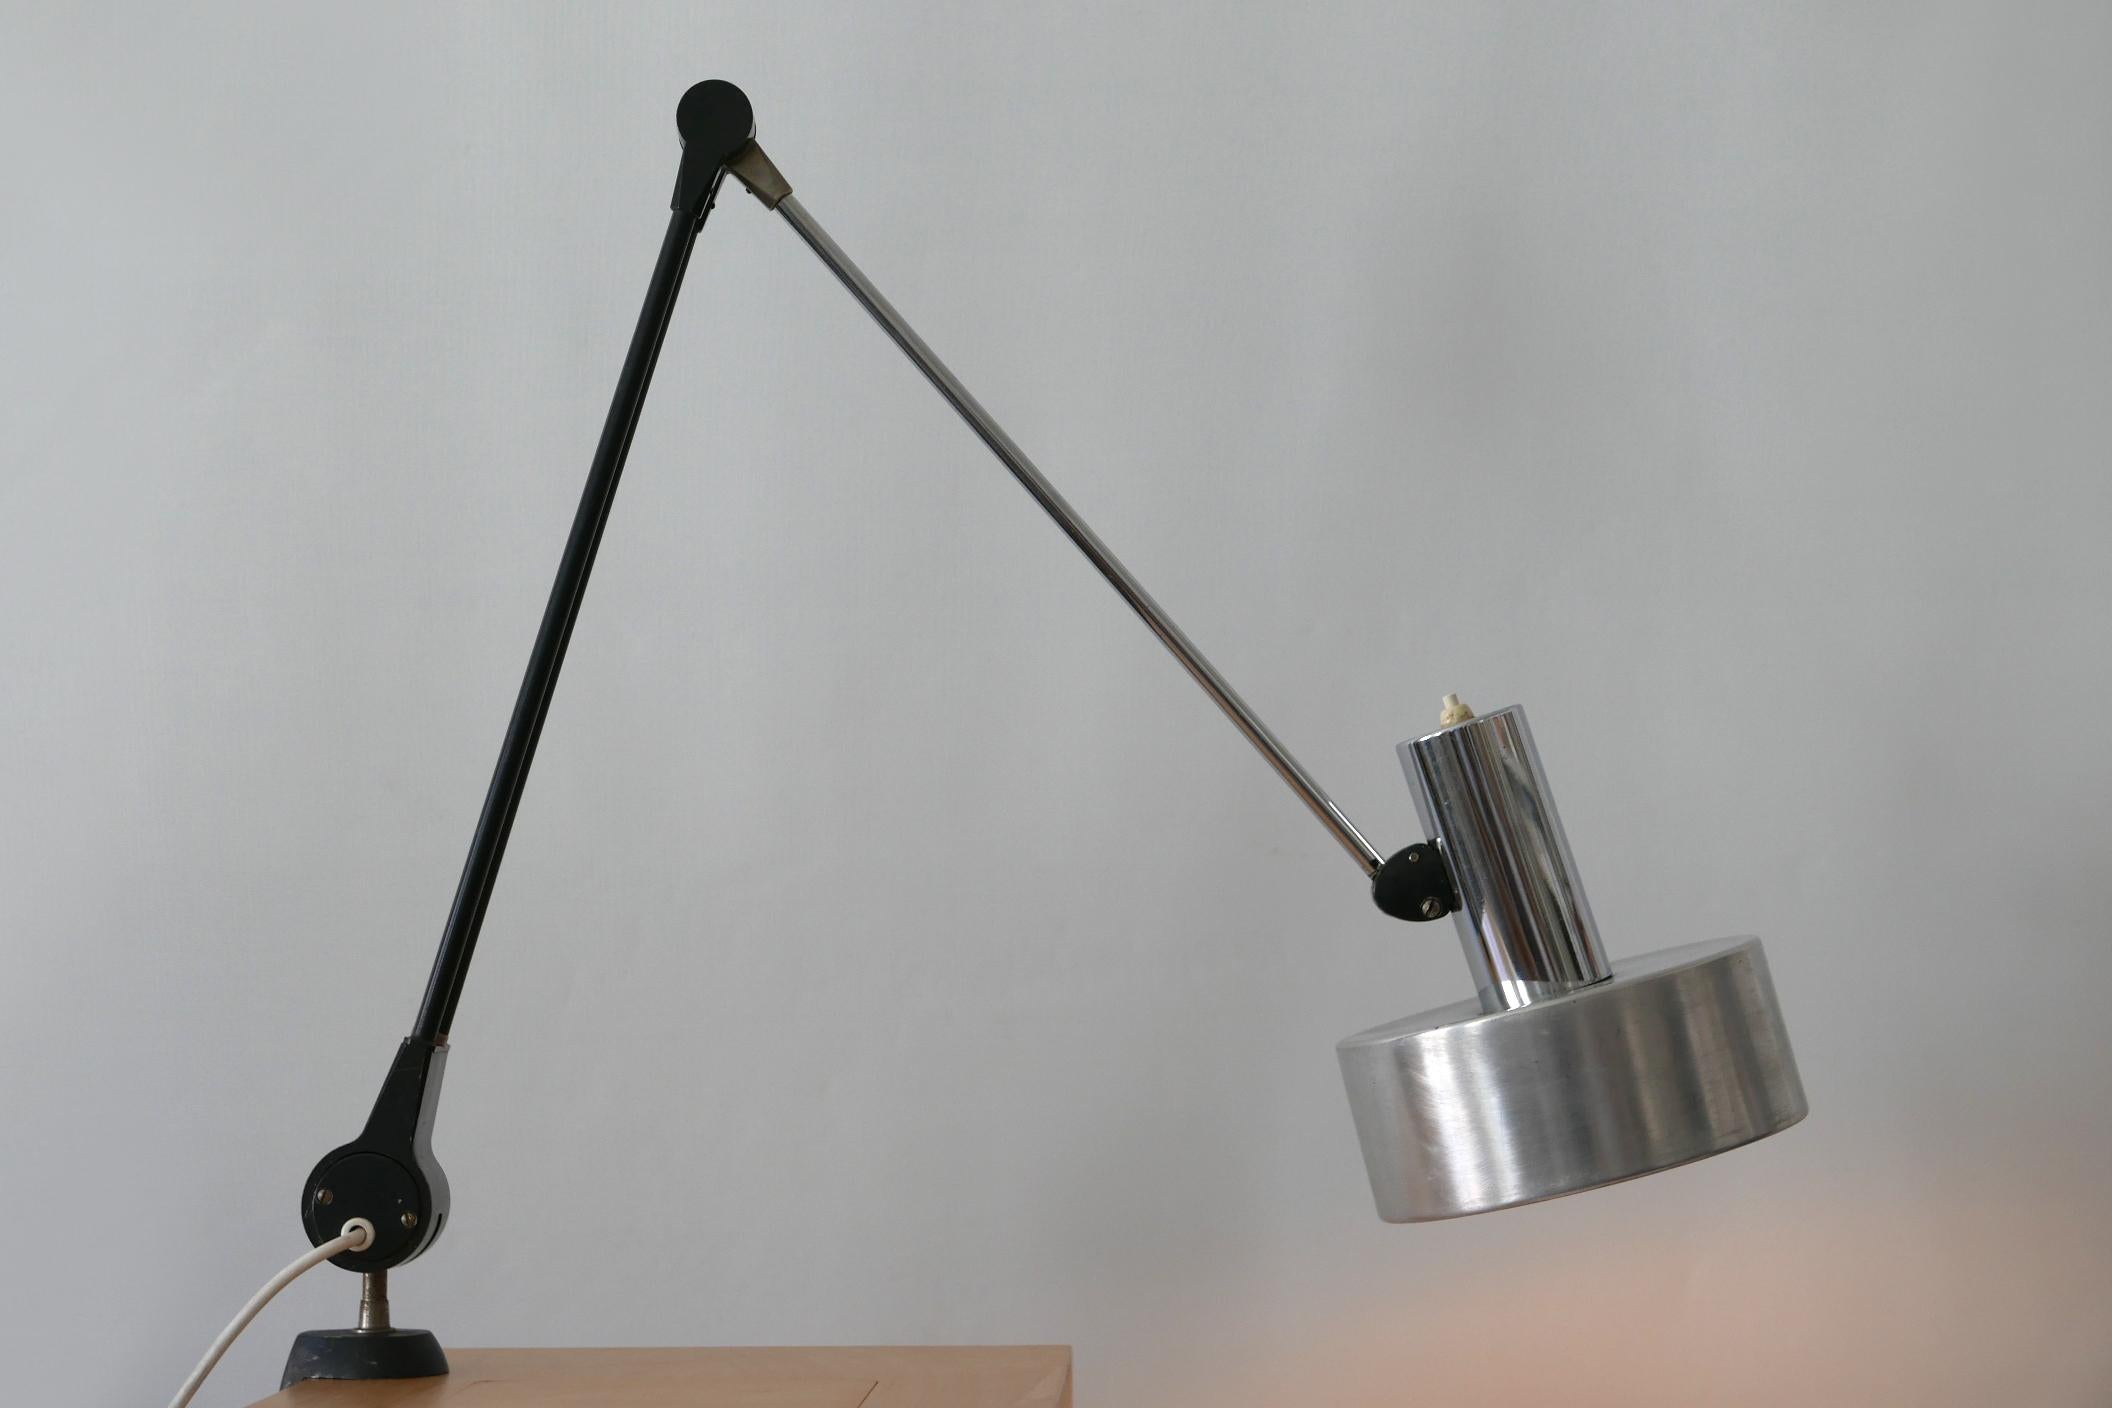 Articulated Mid-Century Modern task lamp or clamp table light. Model 6933. Designed and manufactured by Kaiser Leuchten, 1970s, Germany.

Executed in steel and aluminium, the lamp needs 1 x E27 Edison screw fit bulb, is wired and in working